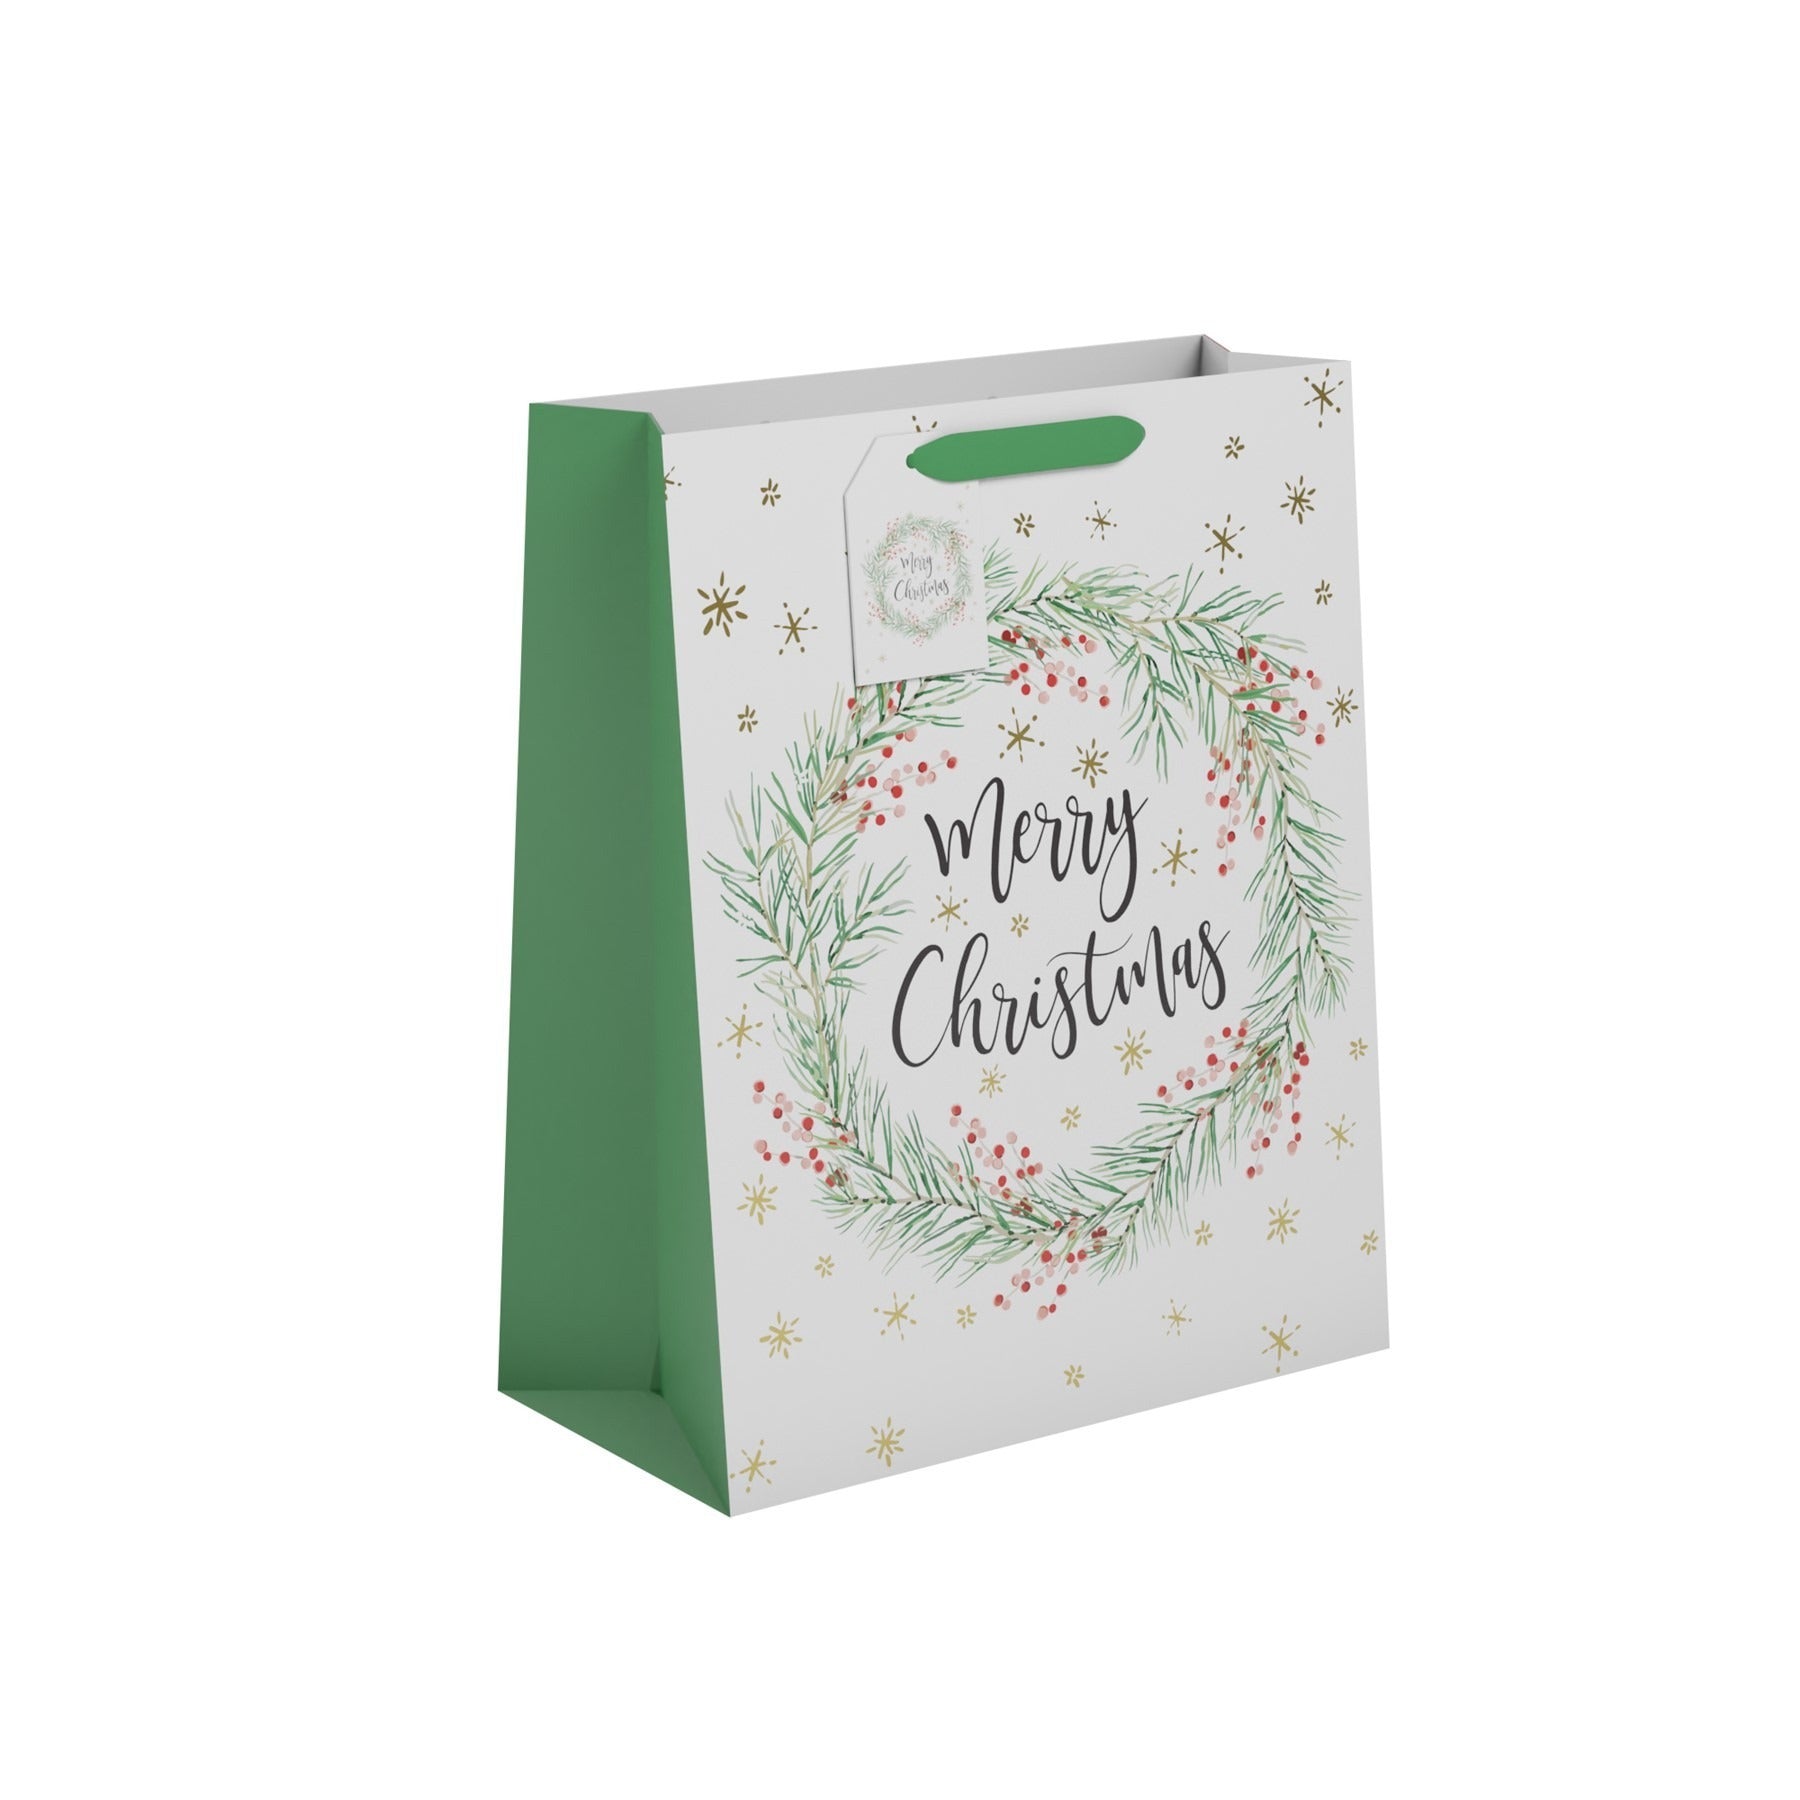 View Christmas Wreath Gift Bag Large information